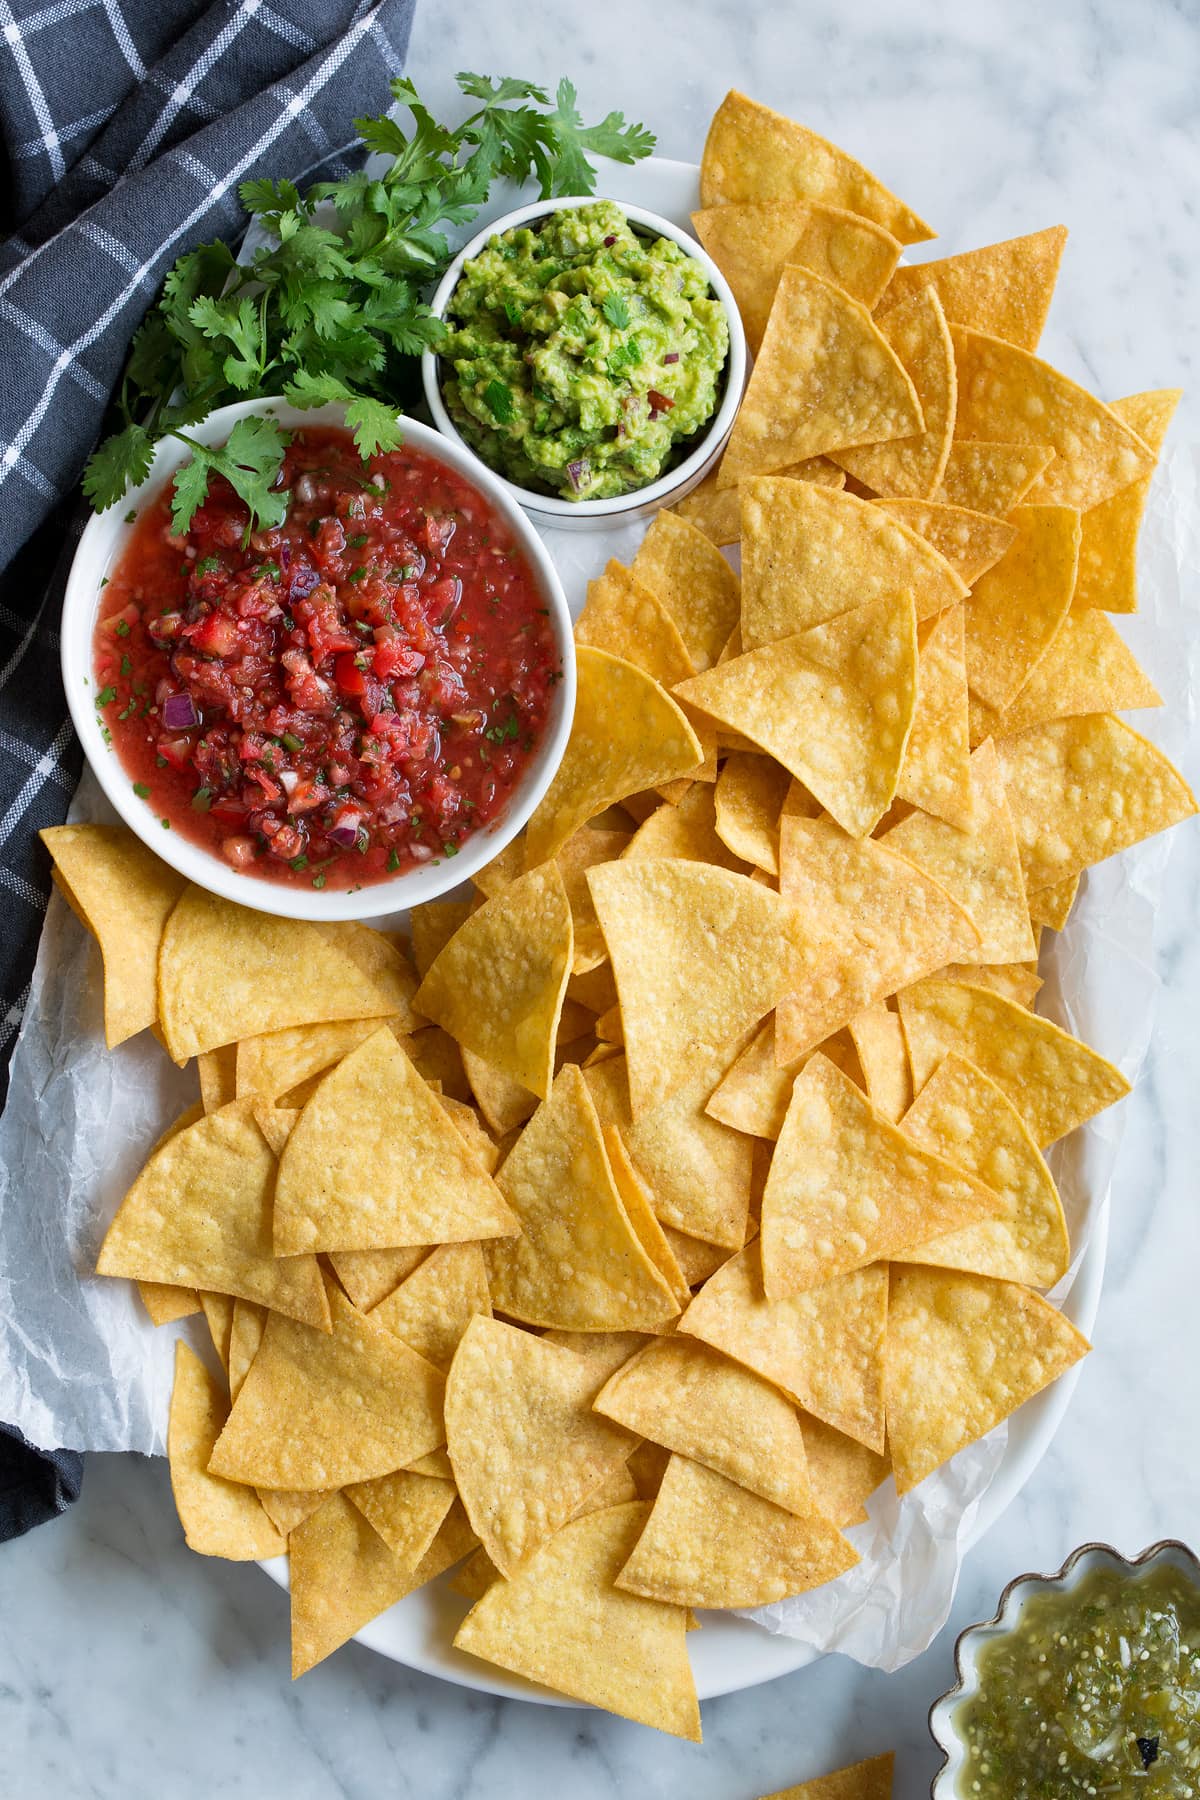 Platter full of homemade tortilla chips with a side of salsa, guacamole and salsa verde.